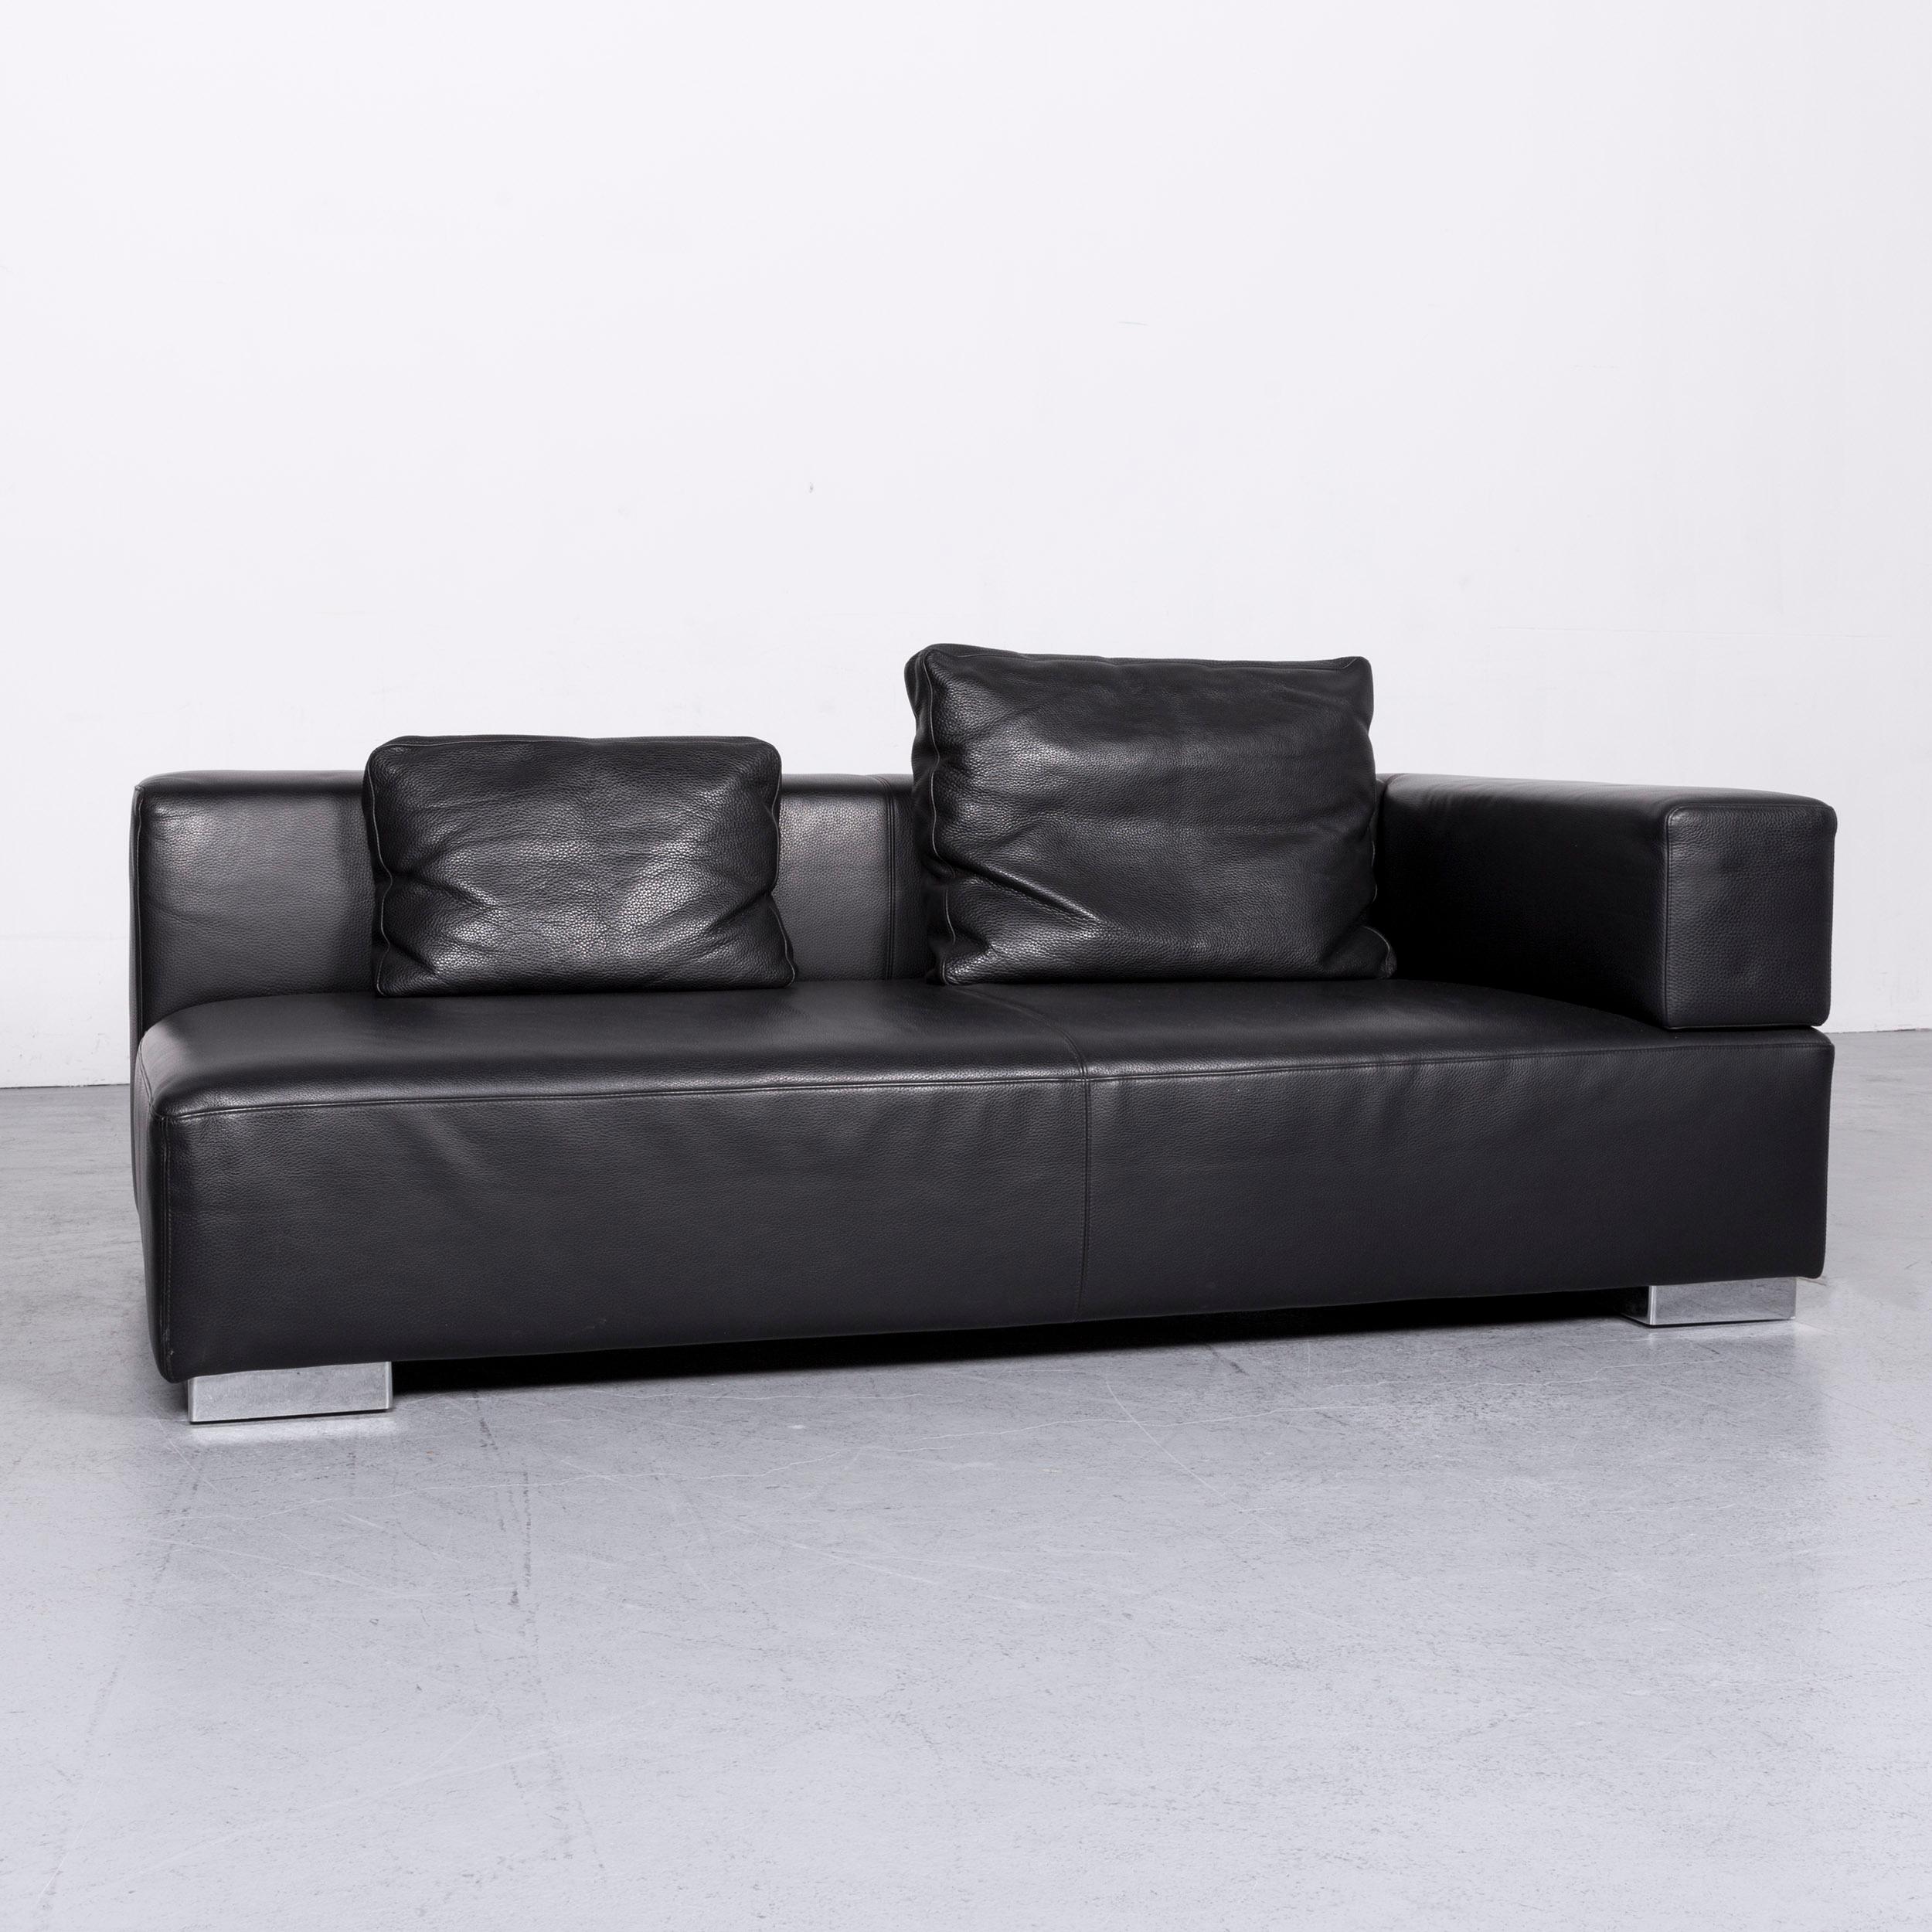 Brühl & Sippold Designer Sofa Set Leather Black Two-Seat Couch Modern For Sale 7